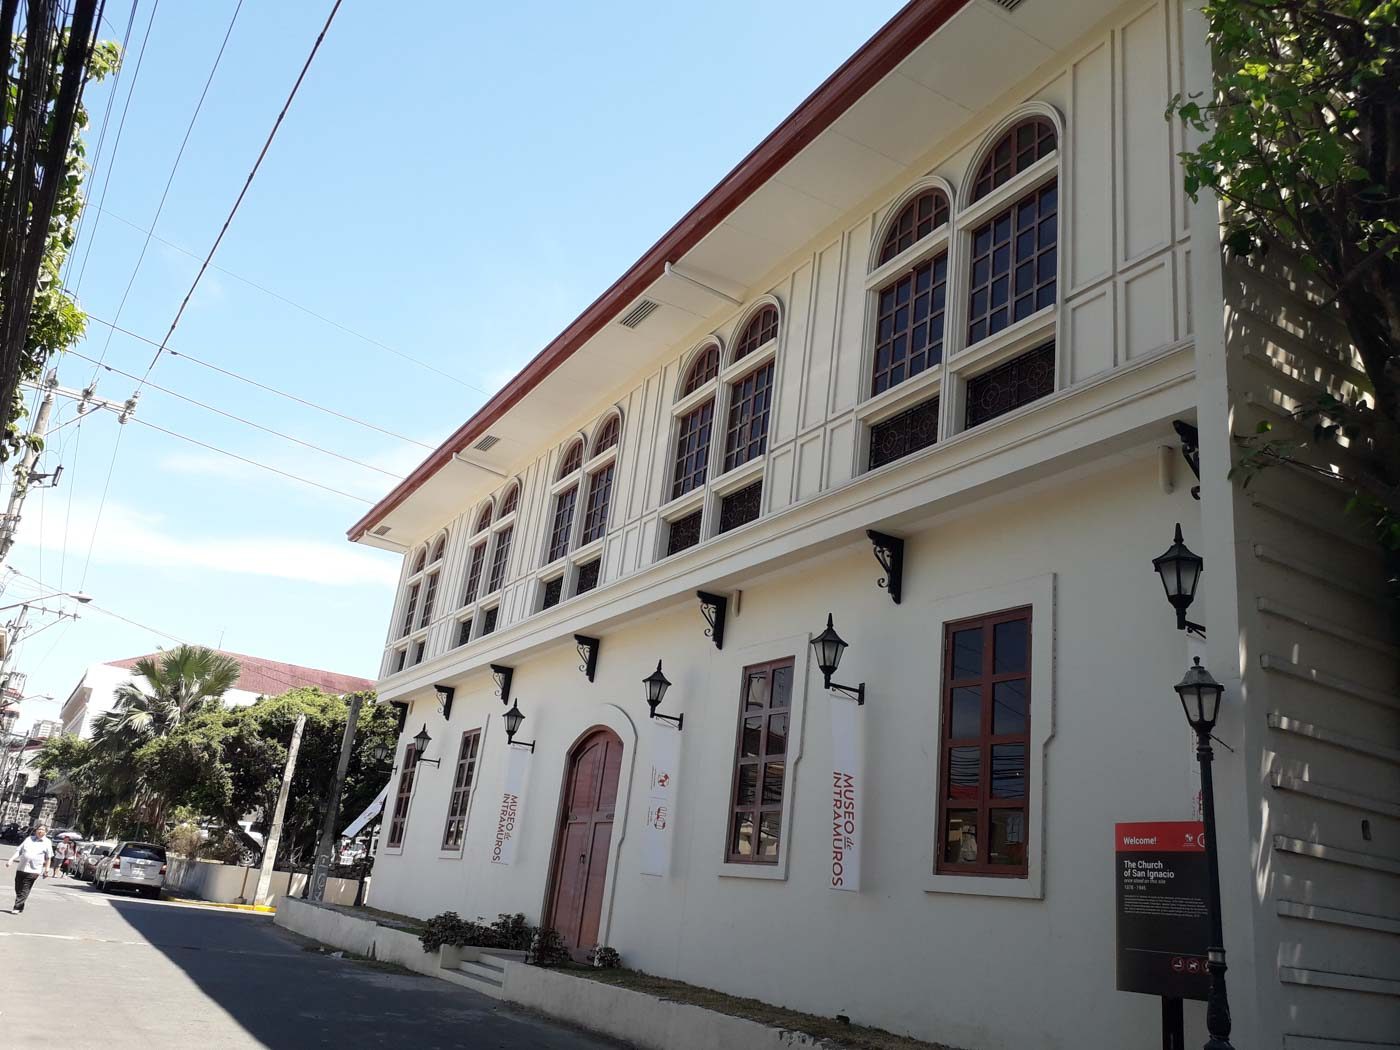 Something new to see in the old Walled City – Museo de Intramuros